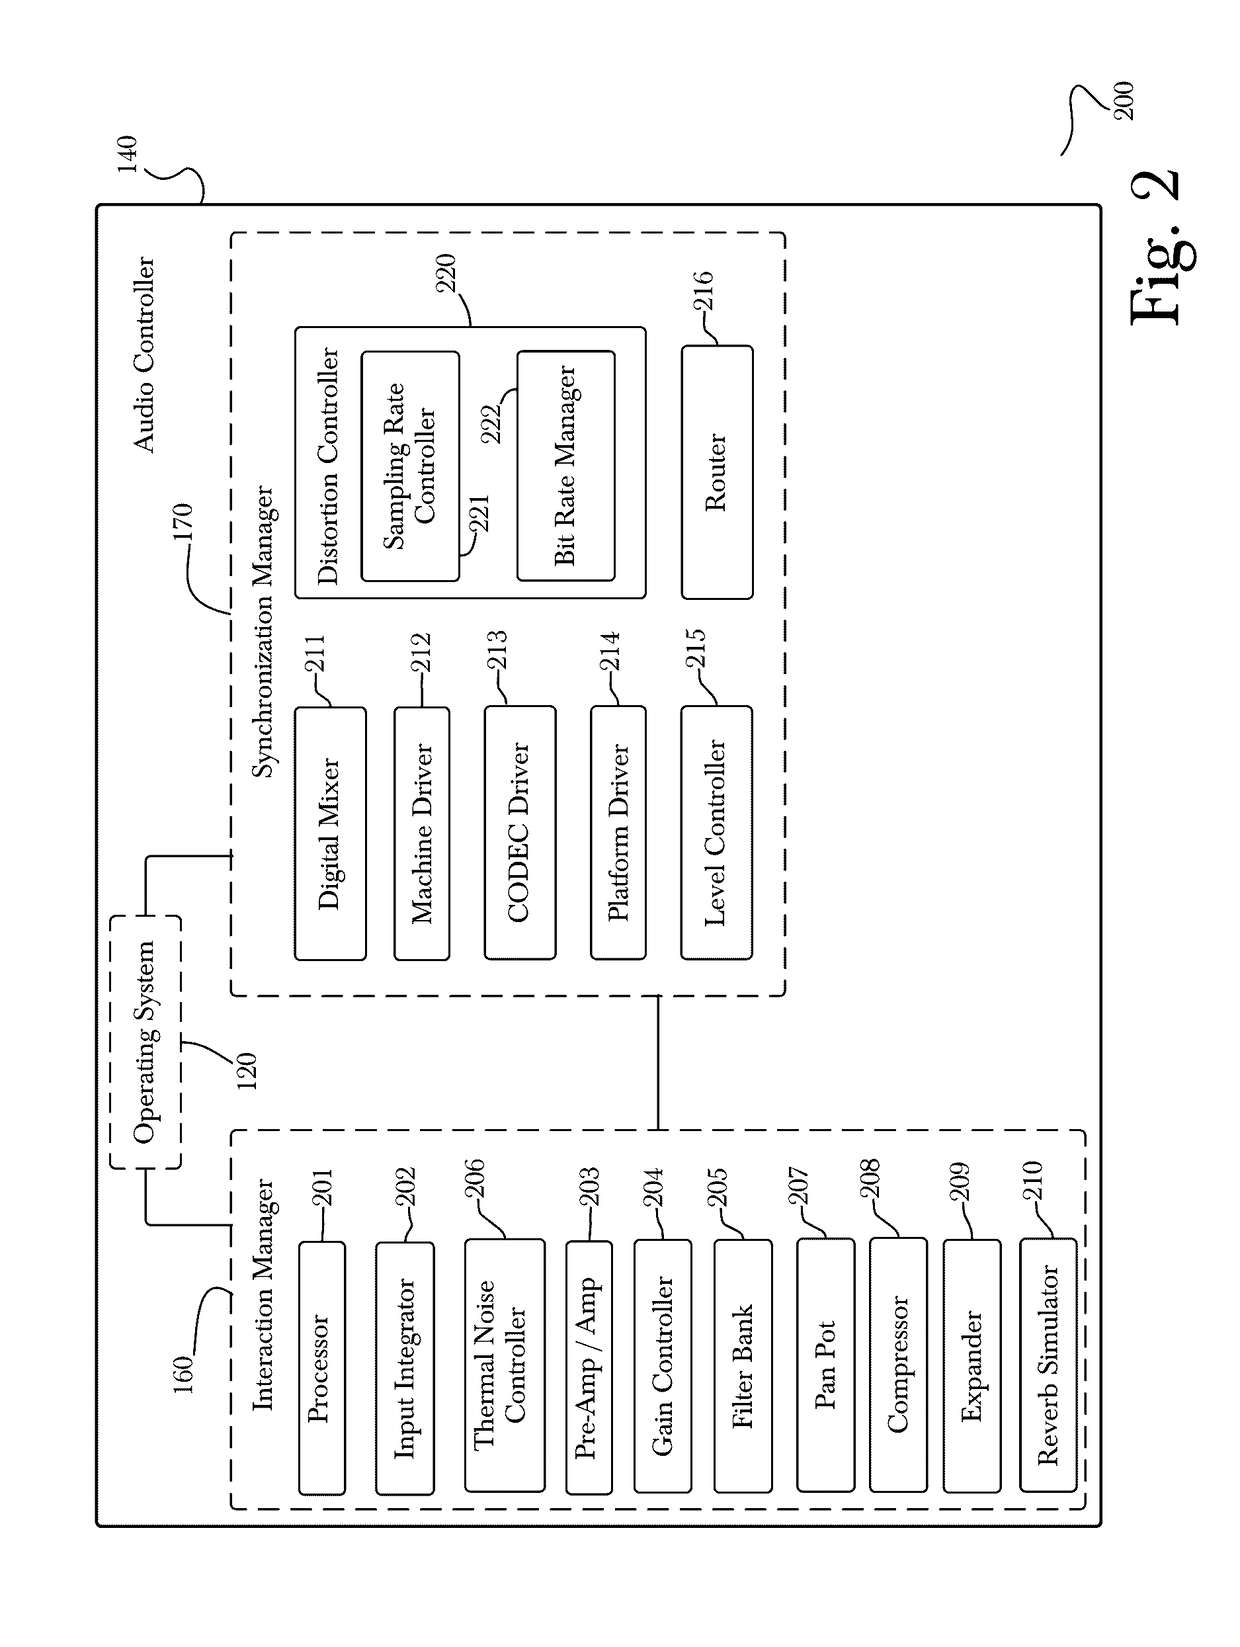 System and method for using multiple audio input devices for synchronized and position-based audio